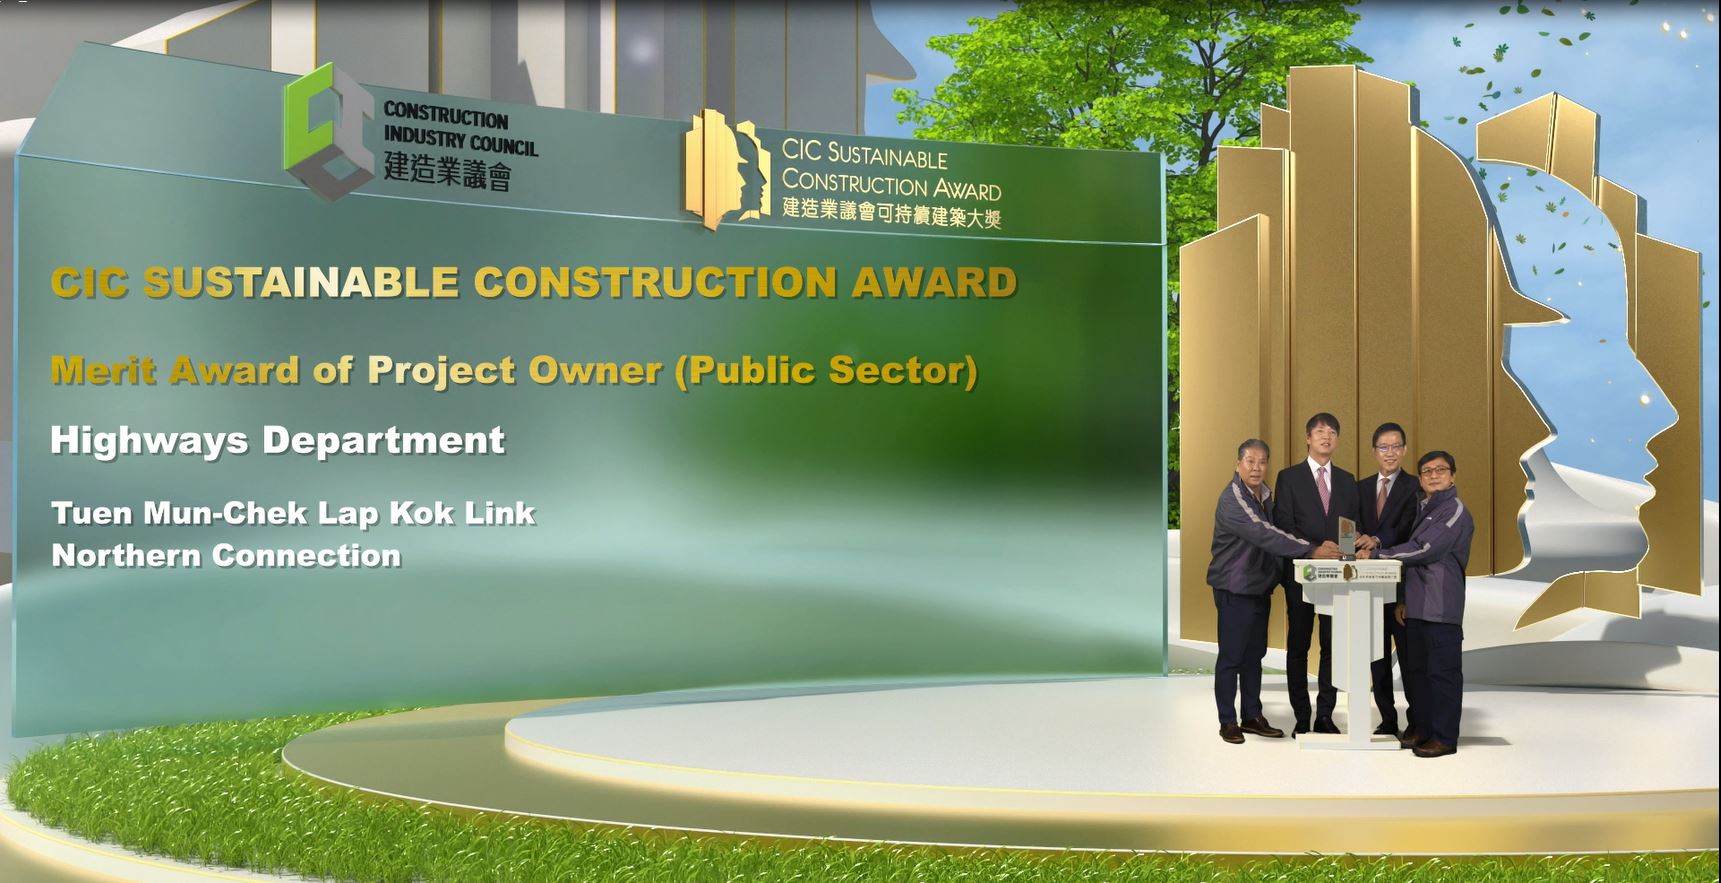 CIC Sustainable Construction Award 2020 - Merit Award of Project Owner (Public Sector)